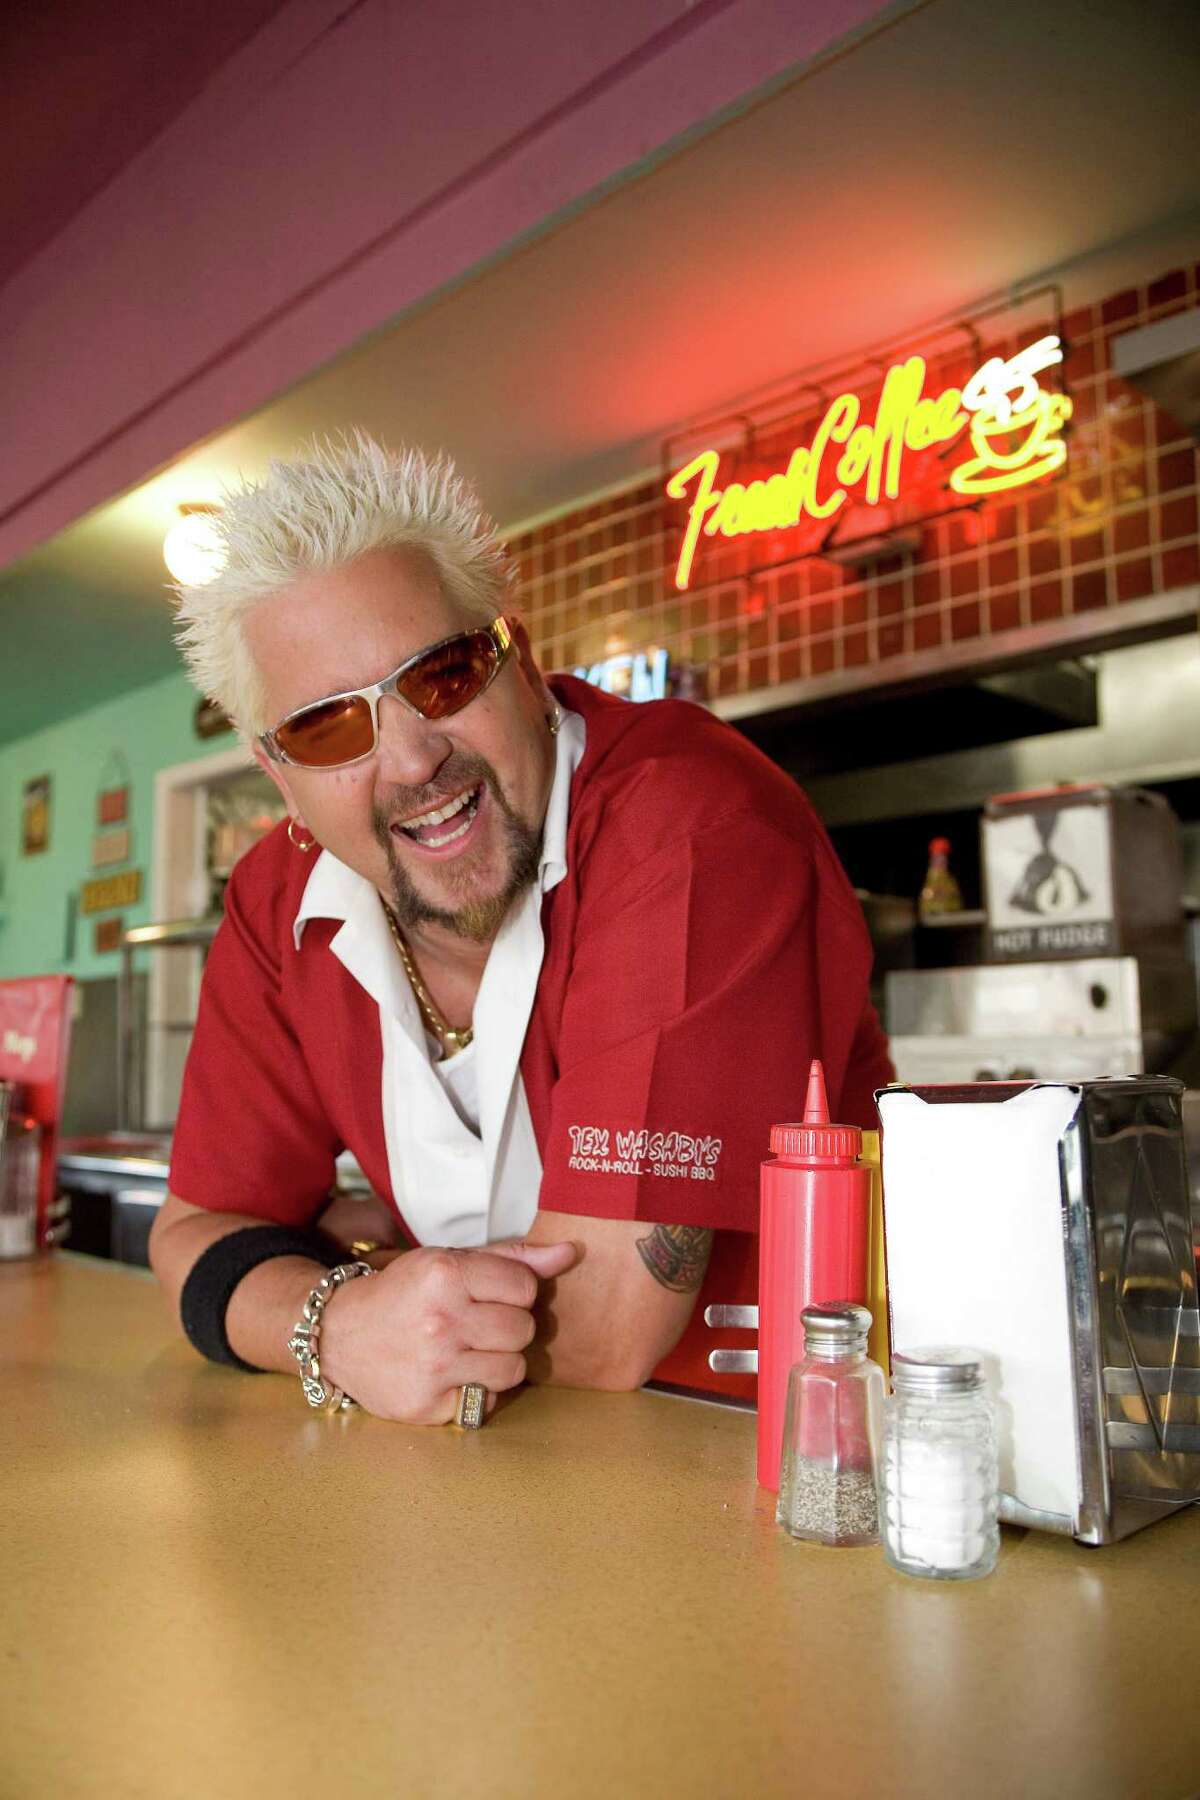 guy fieri diners drive ins and dives